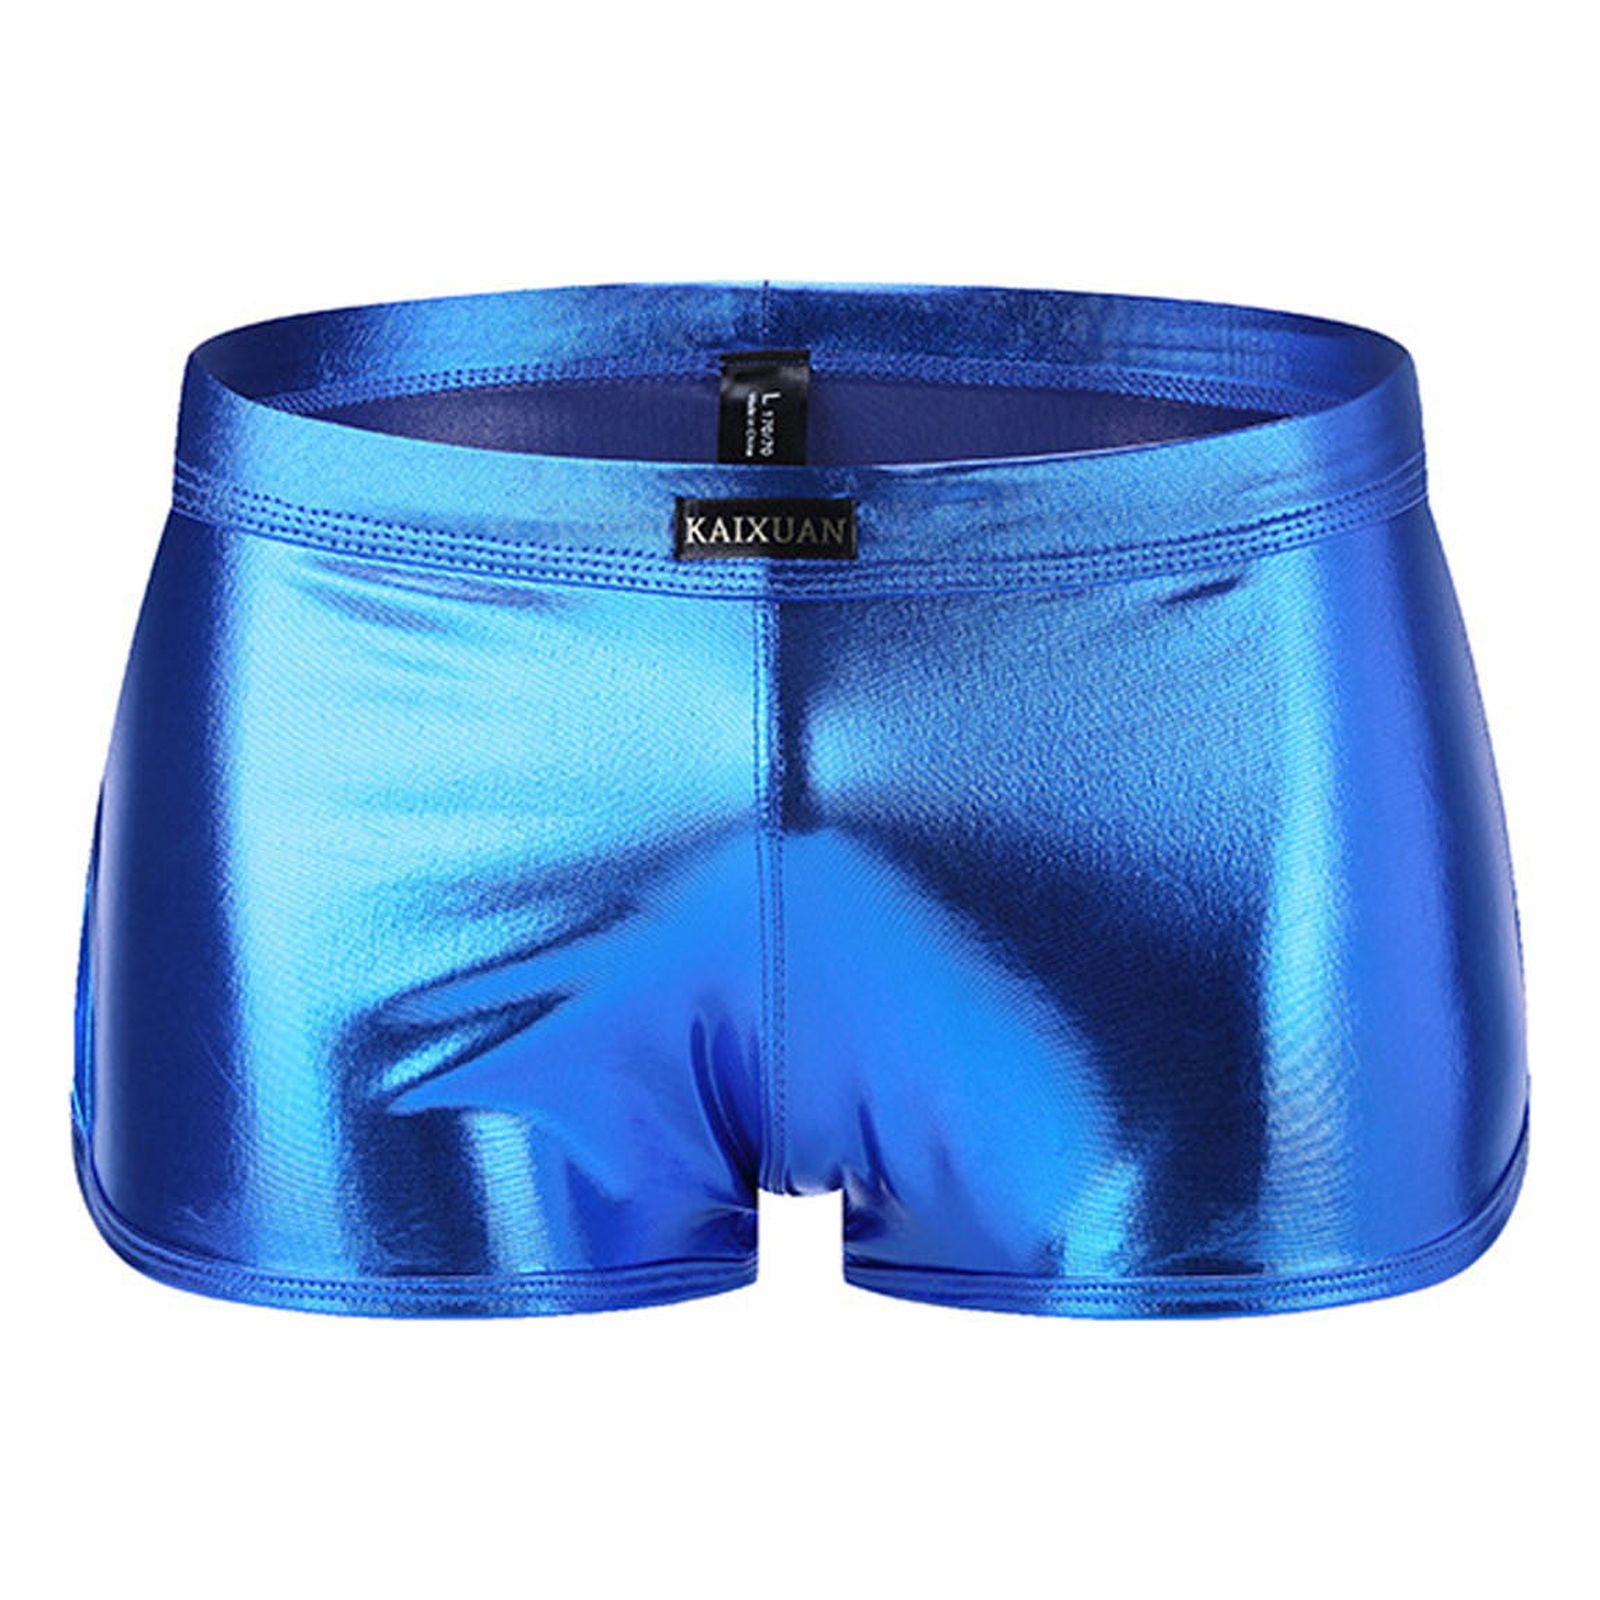 Deals of Today Mens Underwear Briefs Boxer Brief Low-rise Patent